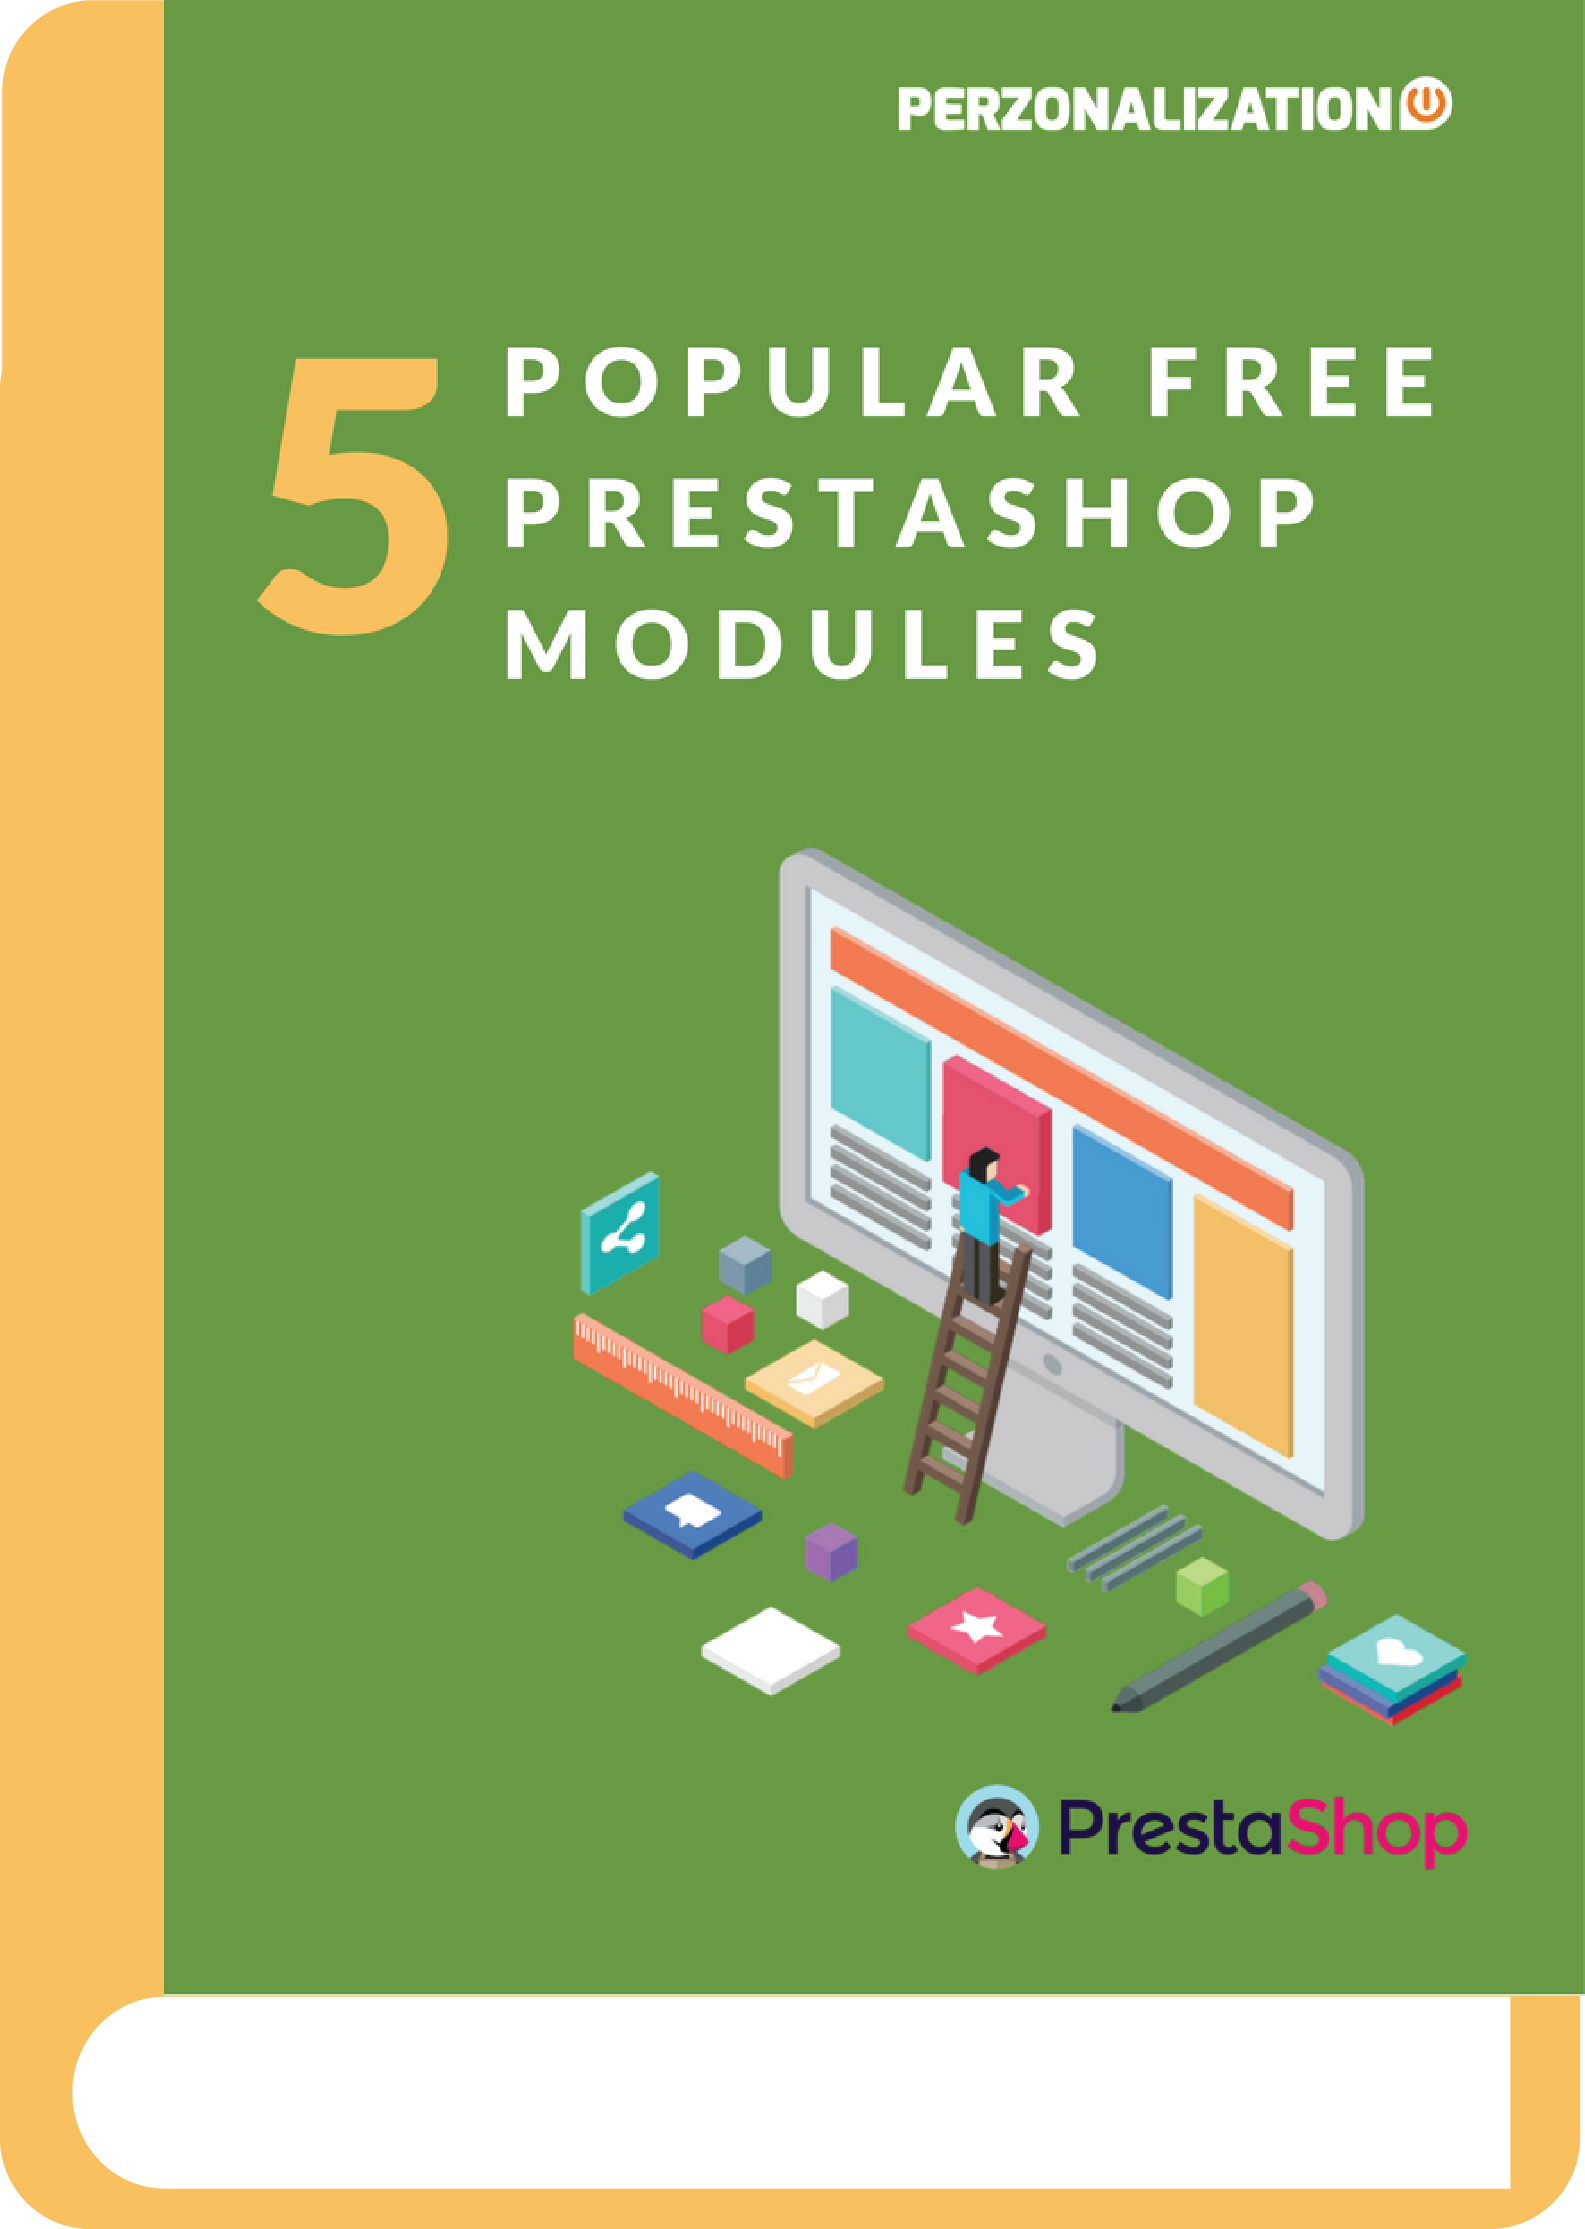 Whoever said ‘Nothing comes free’ surely didn’t know about these gorgeous Prestashop free Modules which are absolutely free.